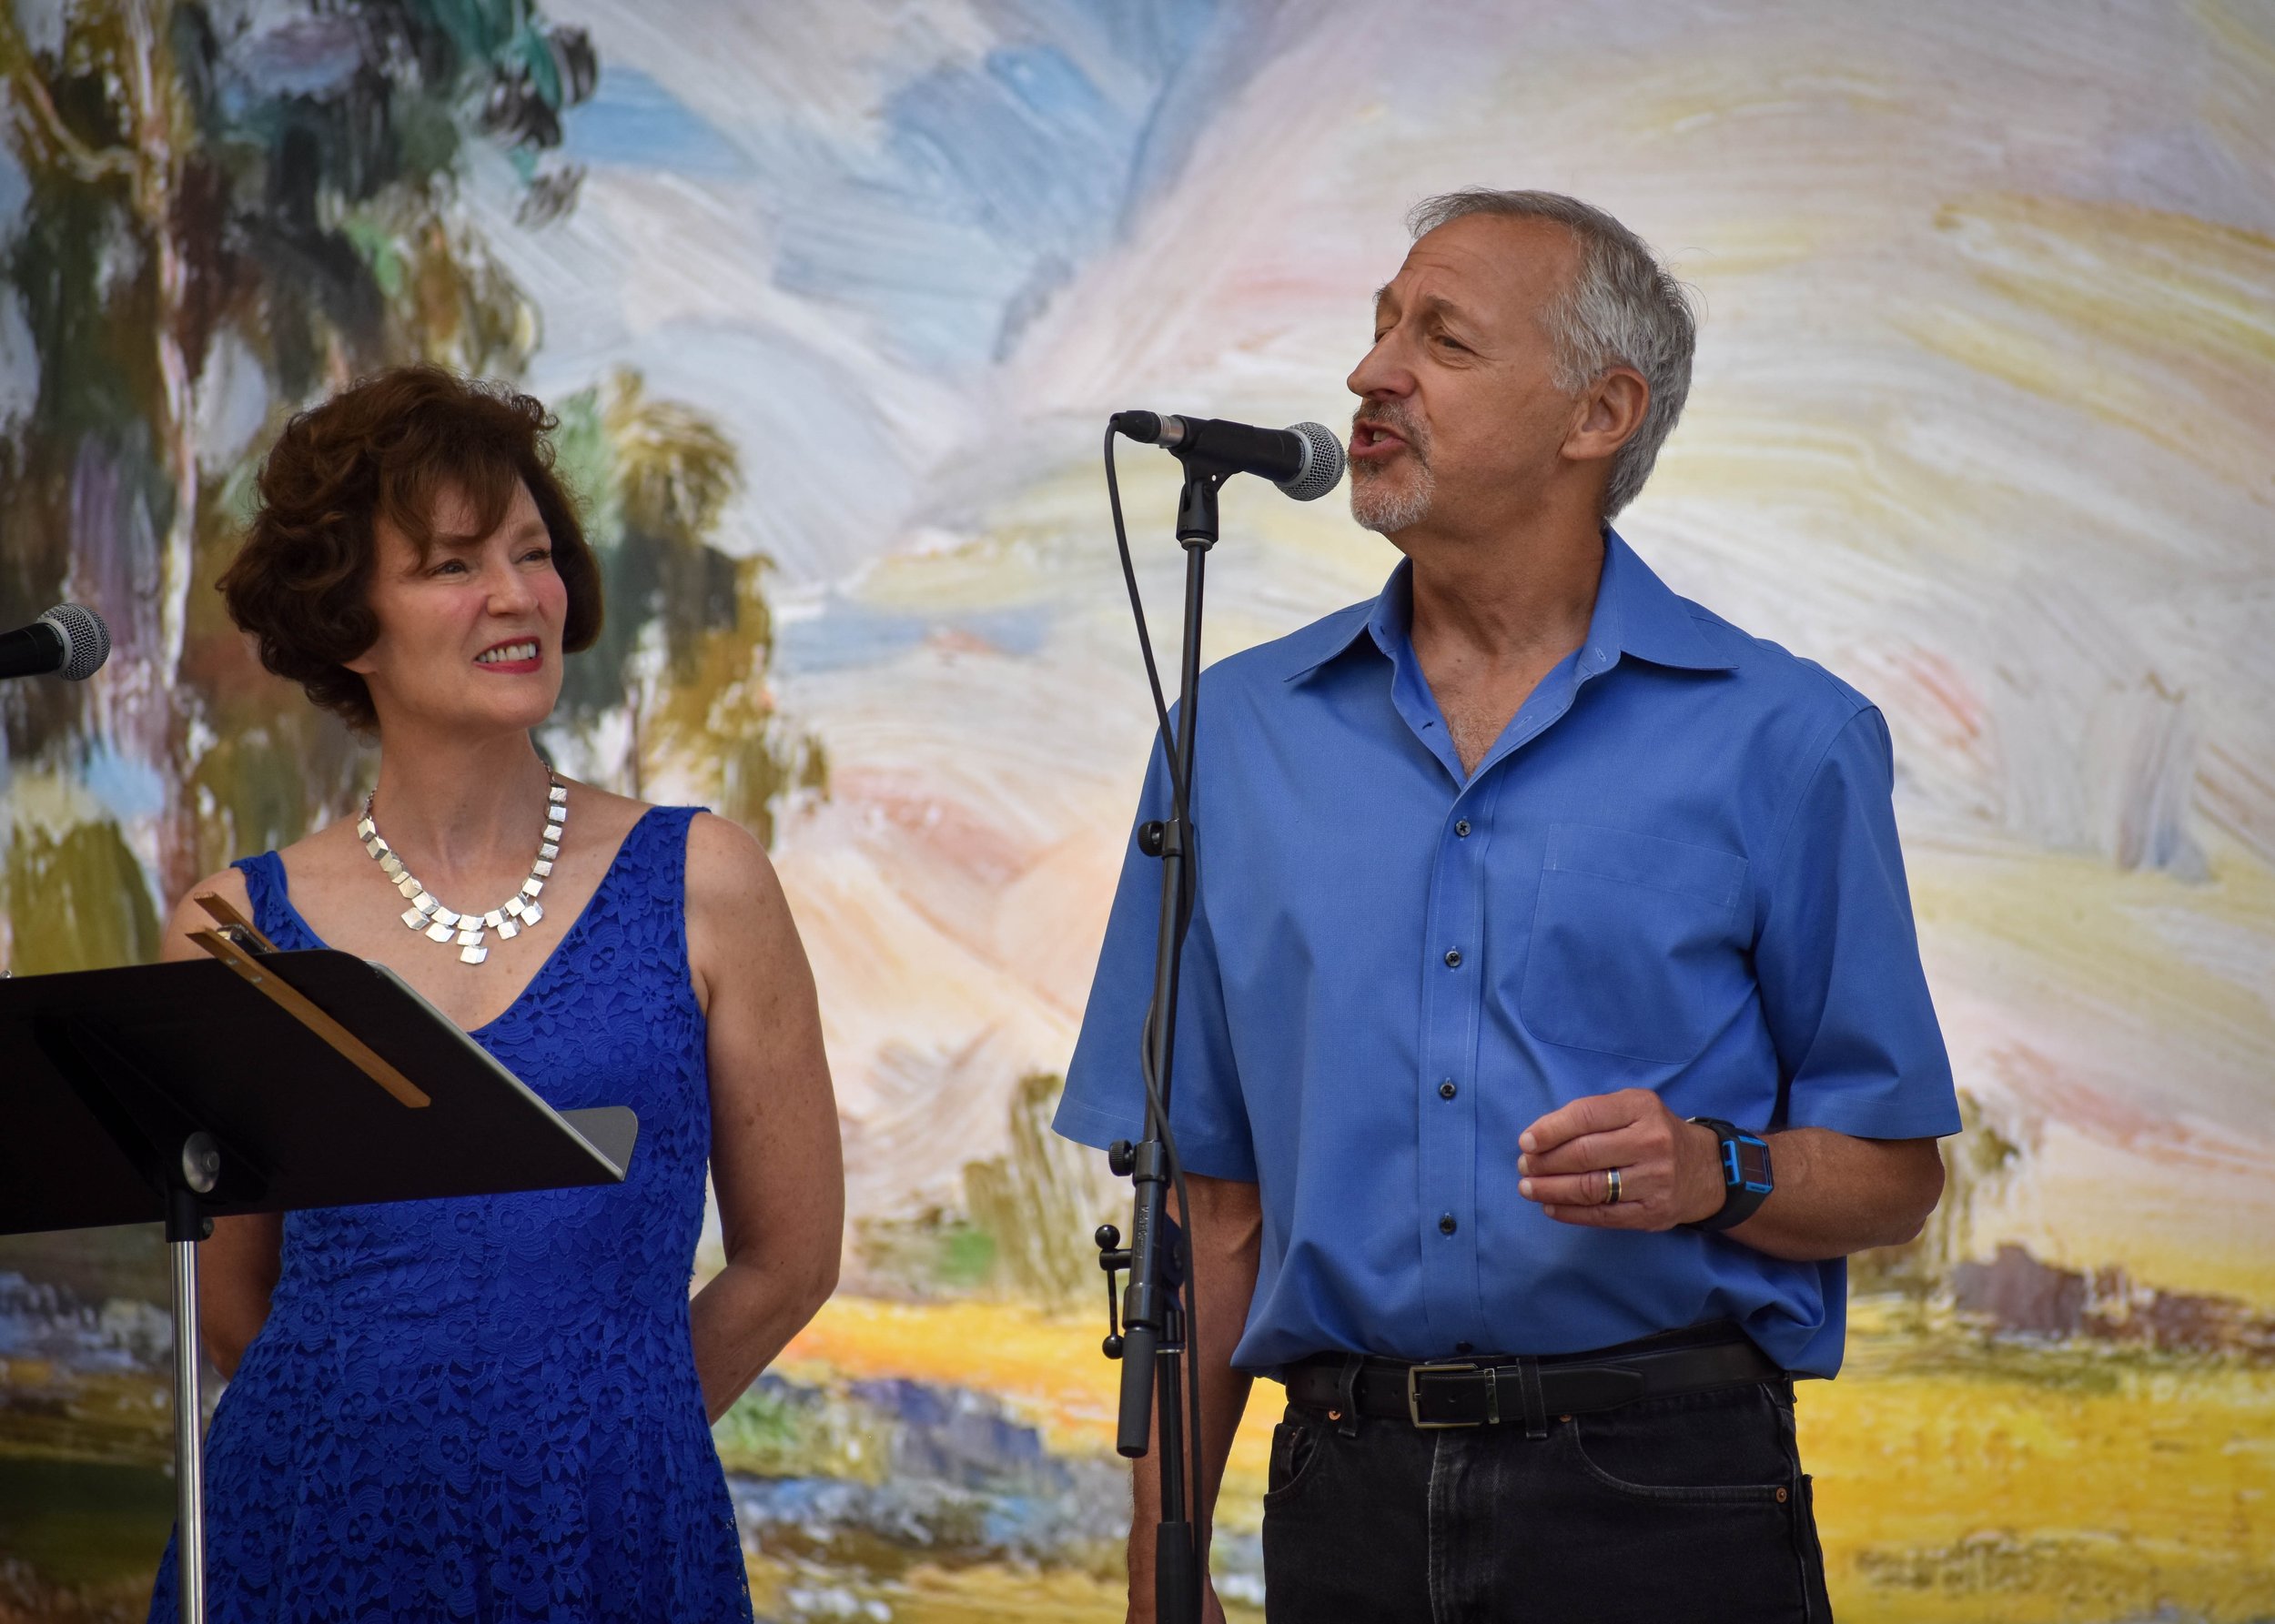 07-17-2022 LCCB Fest of Arts Summer Concert Series by Peyton Webster74-35.jpg